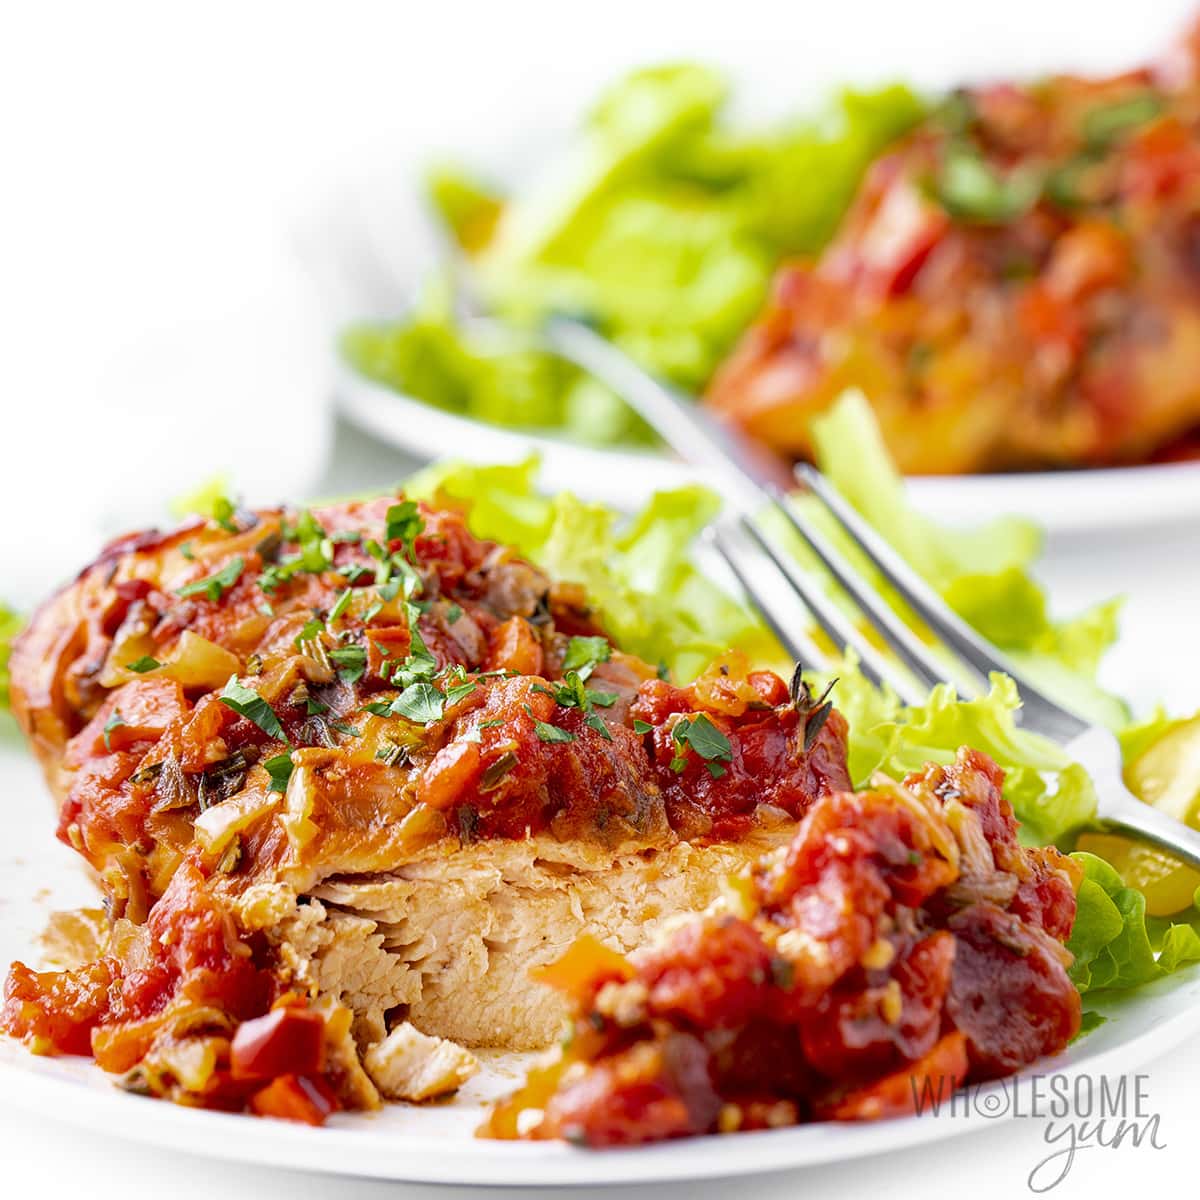 Slow cooker chicken cacciatore on a plate with a fork and salad.